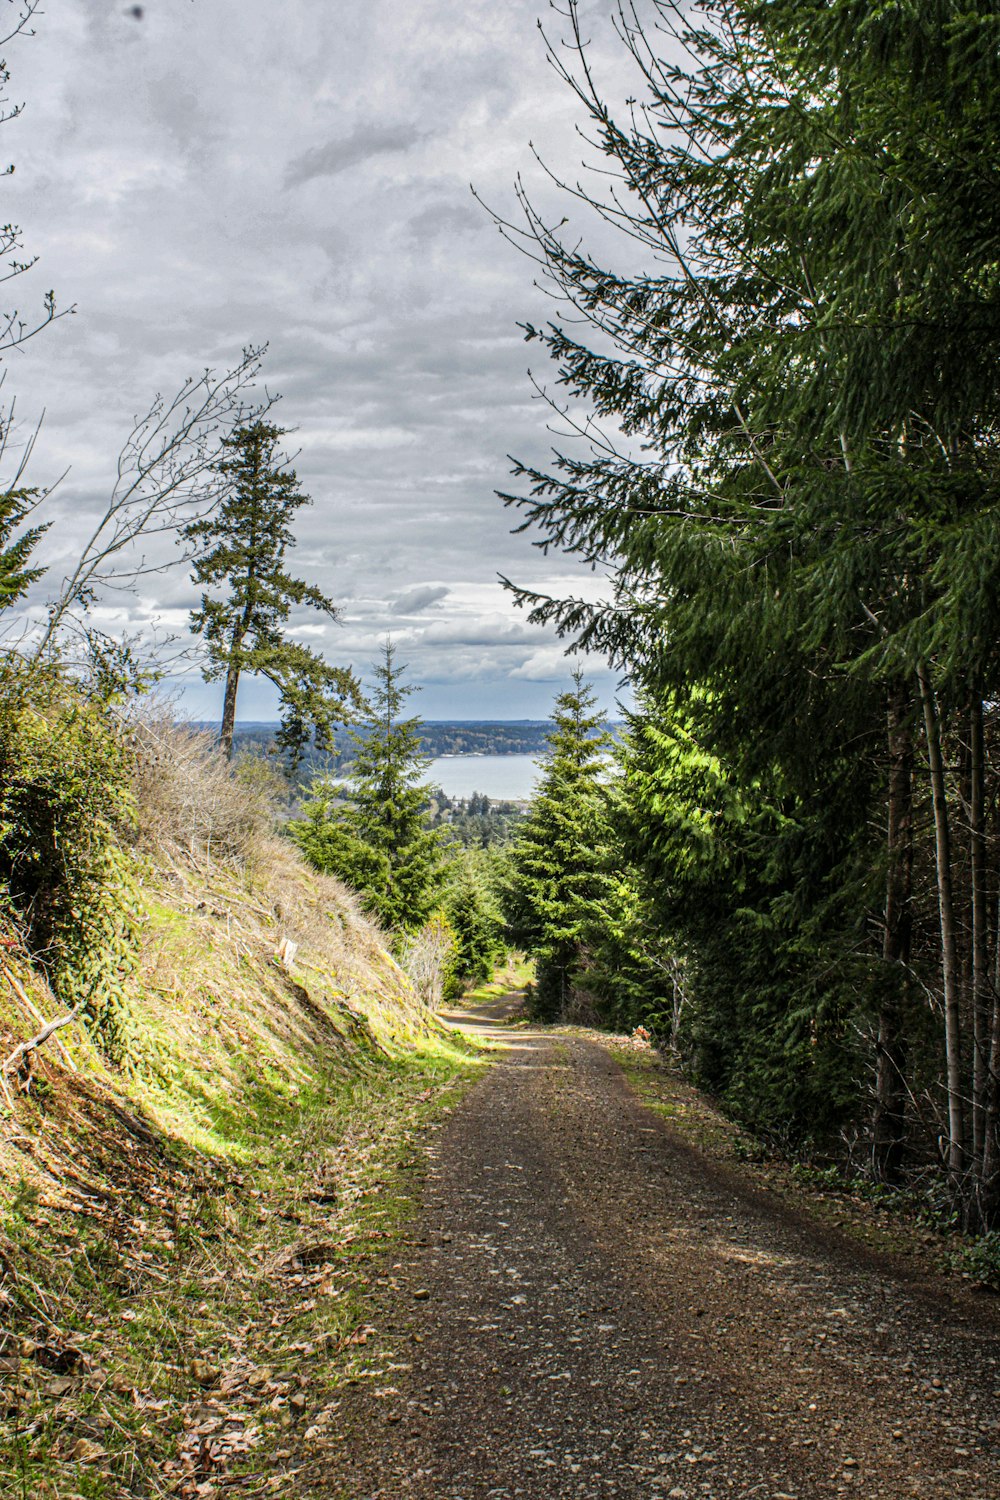 a dirt road surrounded by trees and a body of water